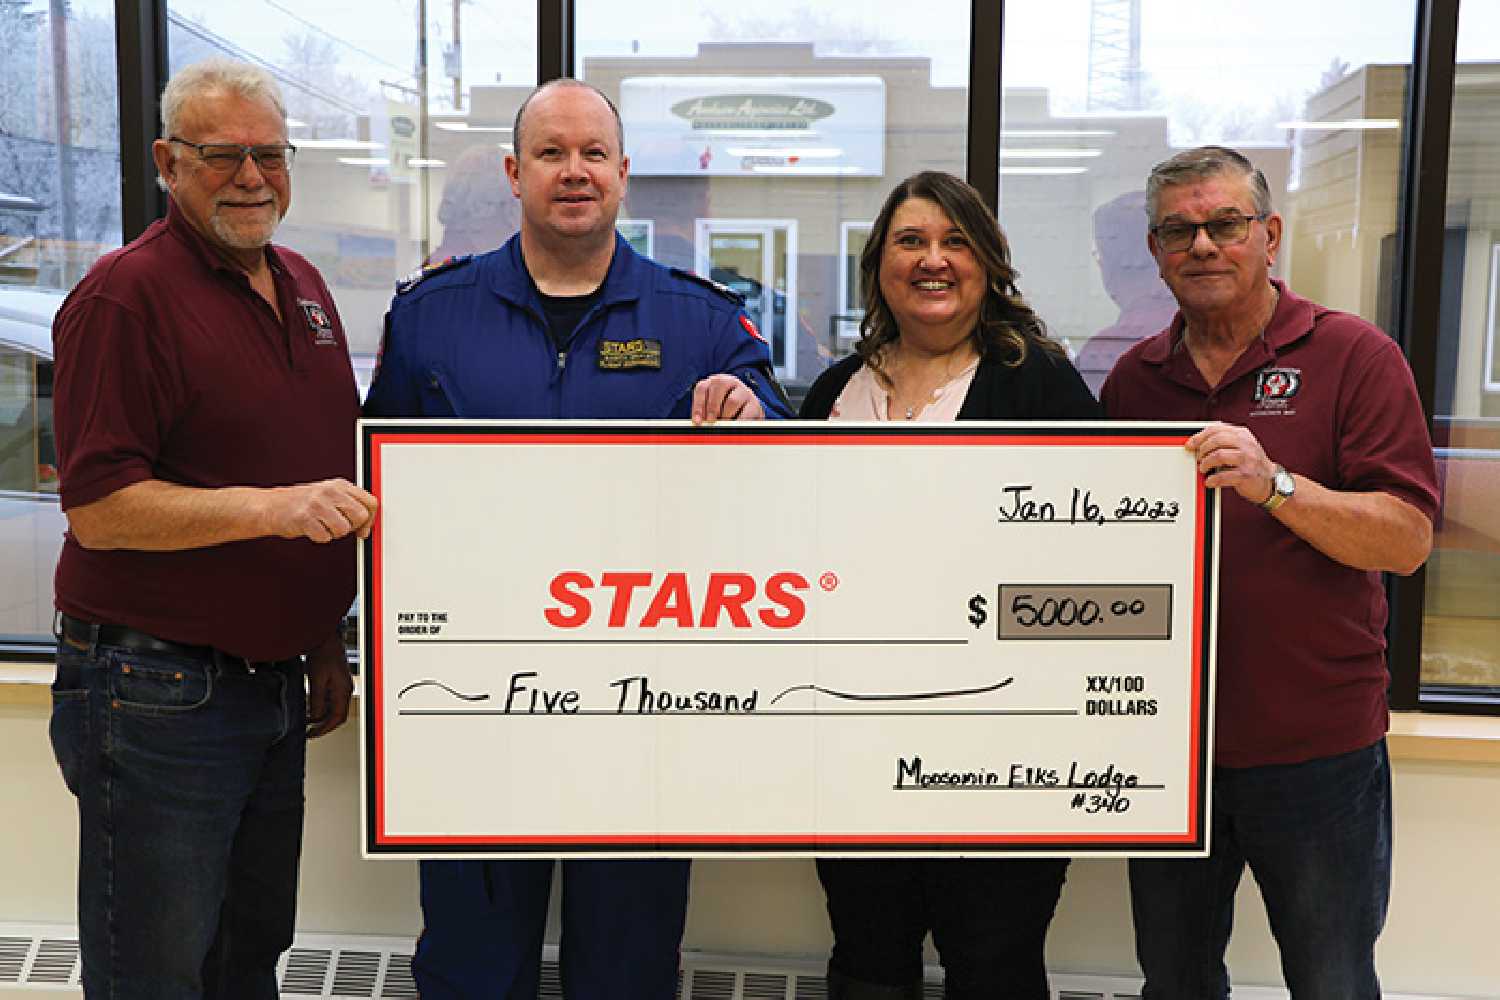 Donation to STARS The Moosomin Elks Lodge presented $5,000 last week to STARS Air Ambulance. From left are Ron Potter of the Moosomin Elks, STARS Clinical Operations Manager Darcy McKay, STARS Community Engagement Officer Kathy Skomar, and Wayne Hopkins of the Moosomin Elks, who was once a patient on a STARS Air Ambulance.